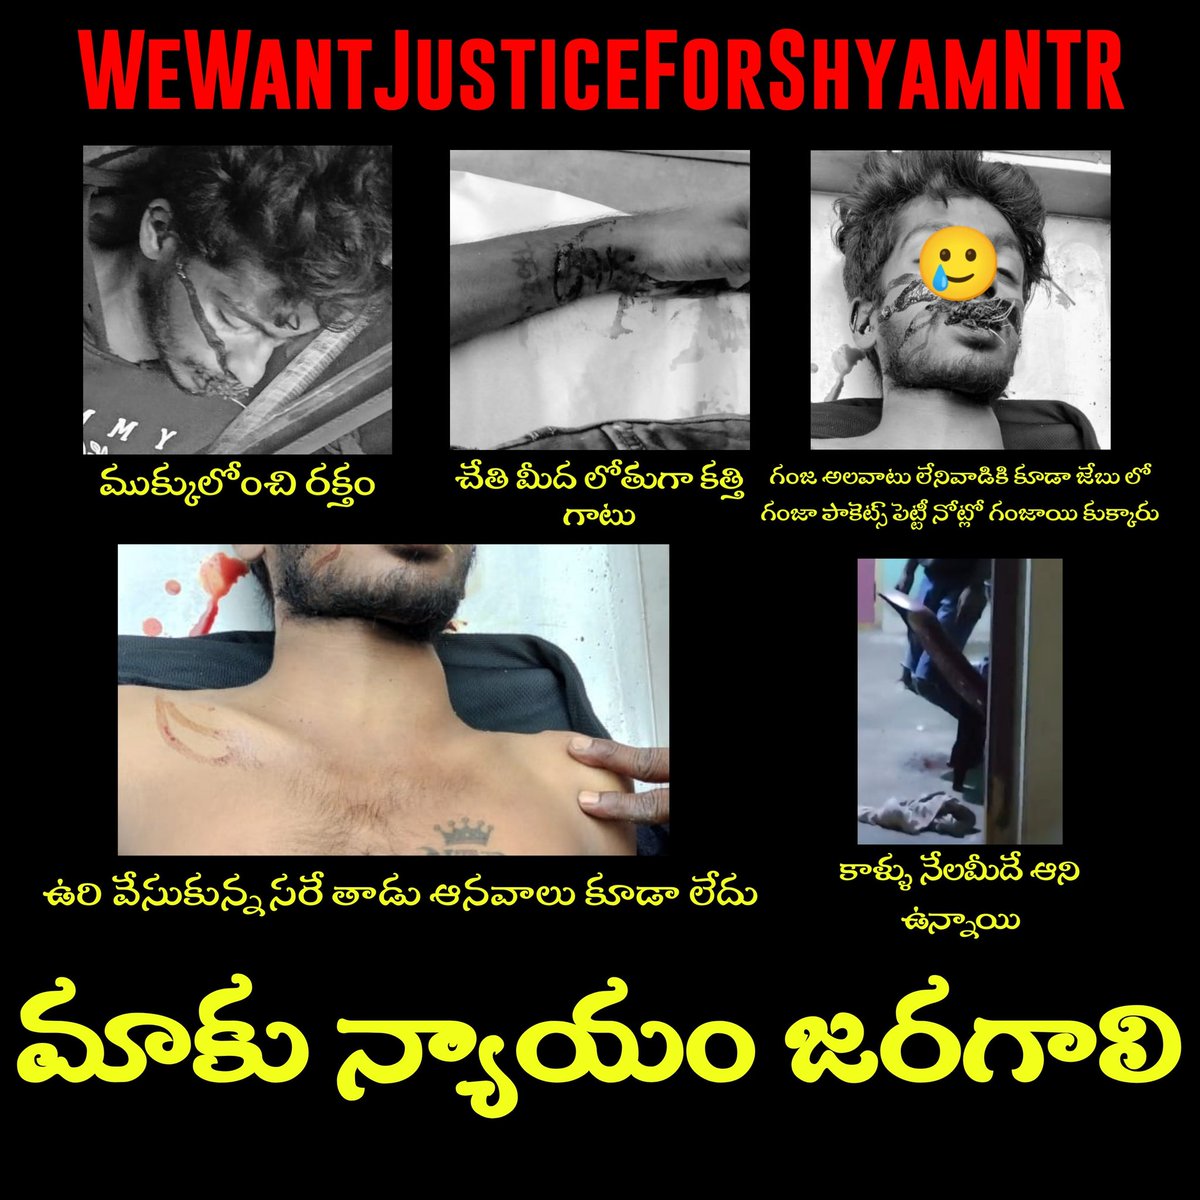 We want Justice to Shyam Family💔
#WeWantJusticeForShyamNTR